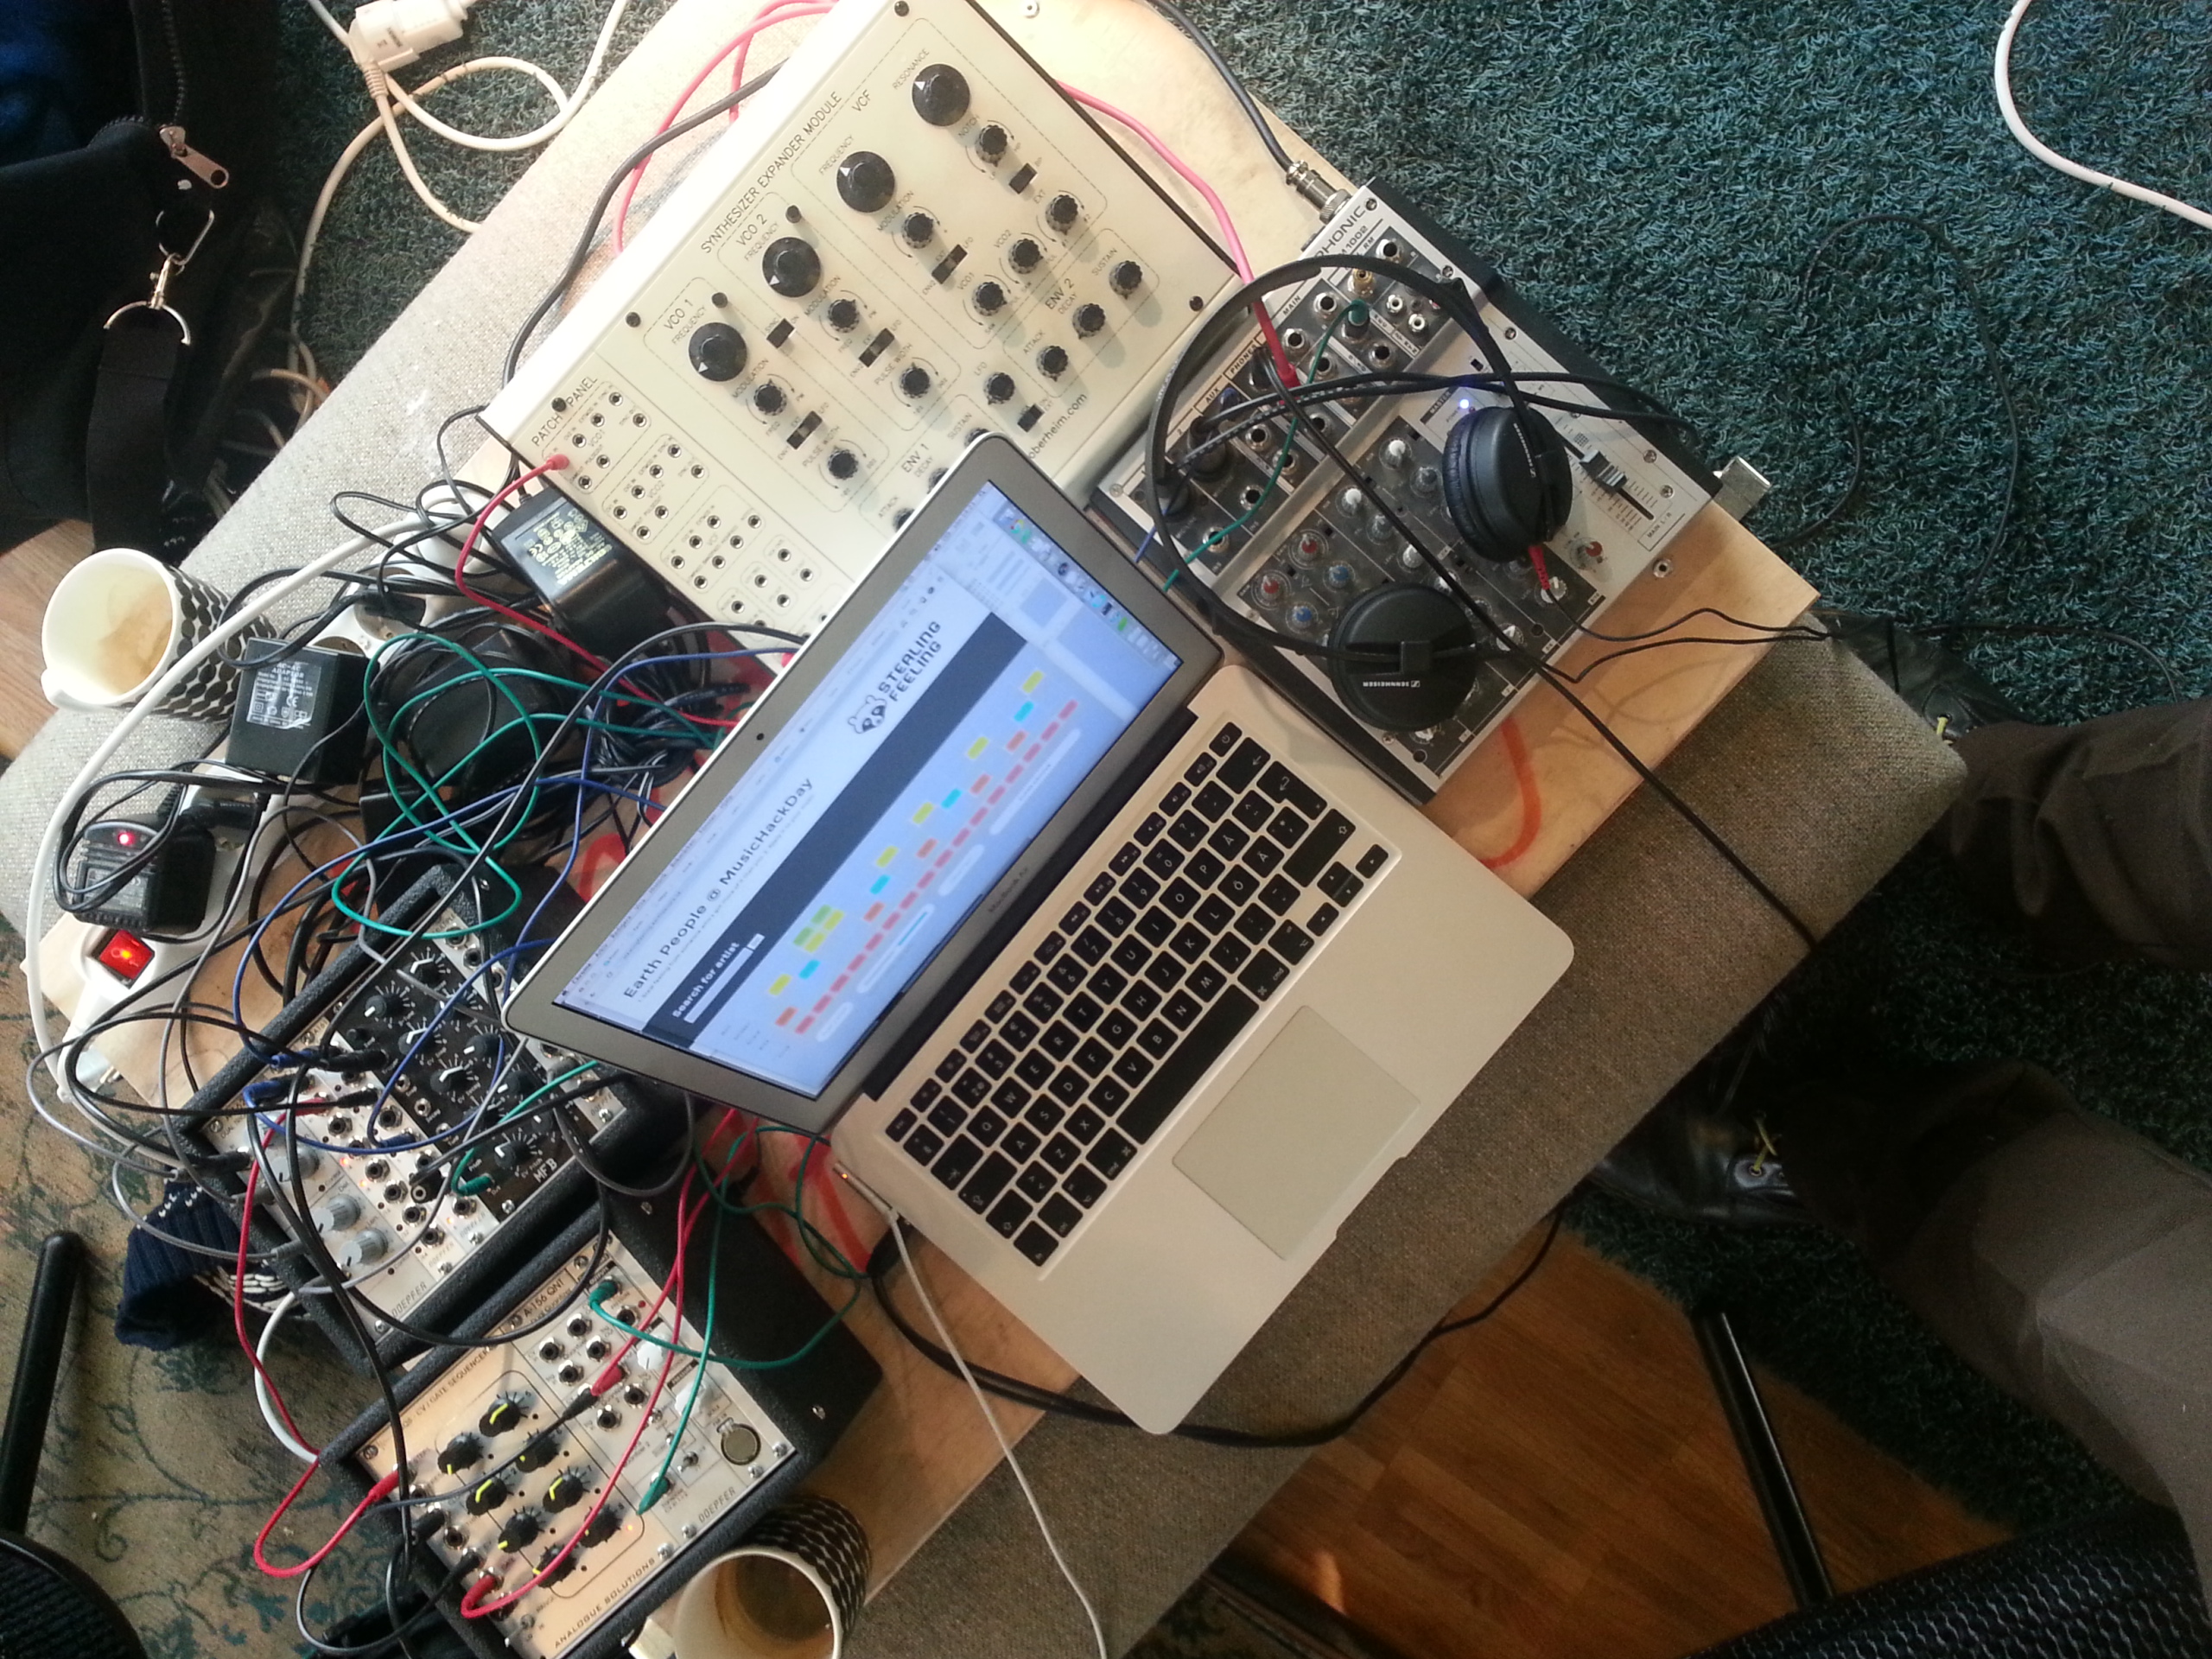 Our #musichackday hack – Stealing Feeling!